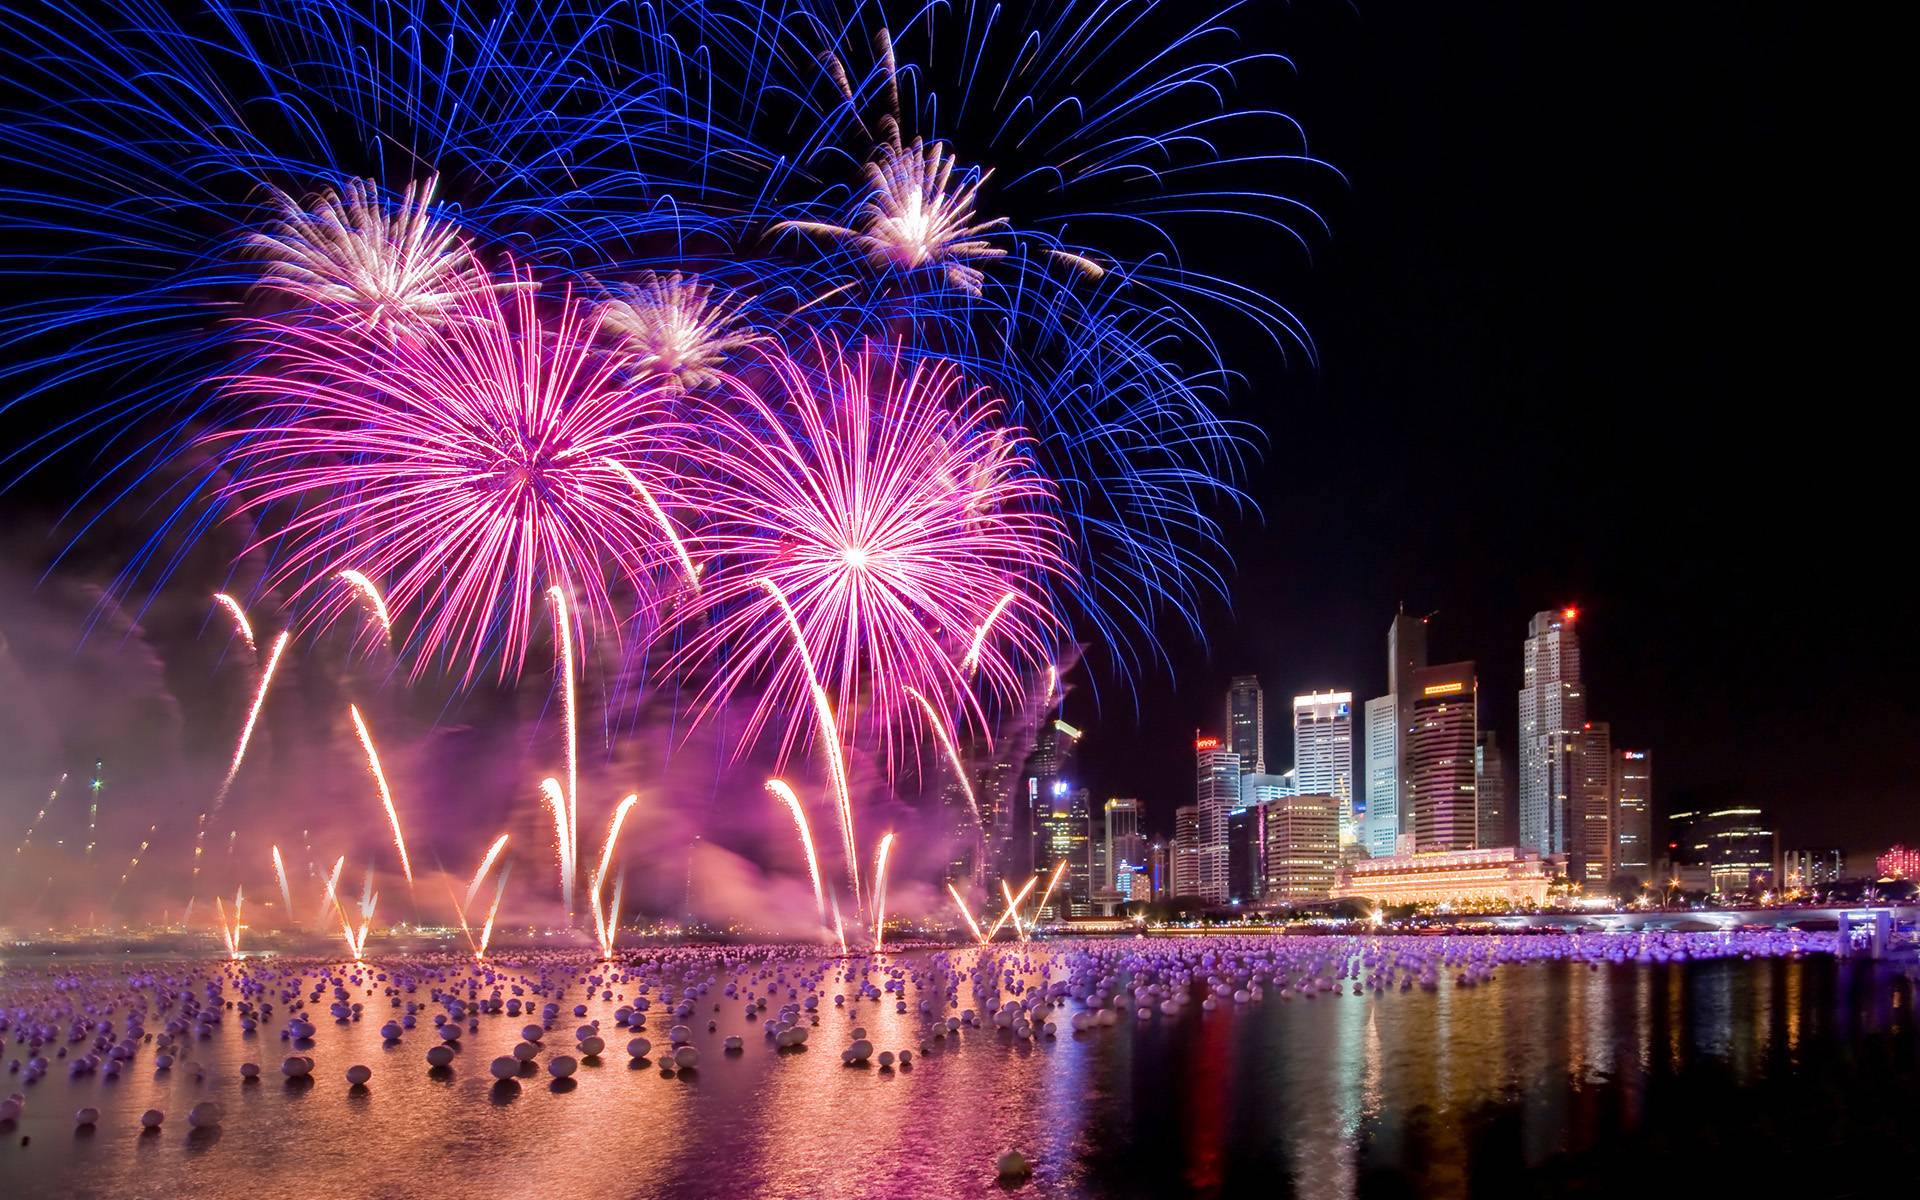 A large fireworks display over the water - New Year